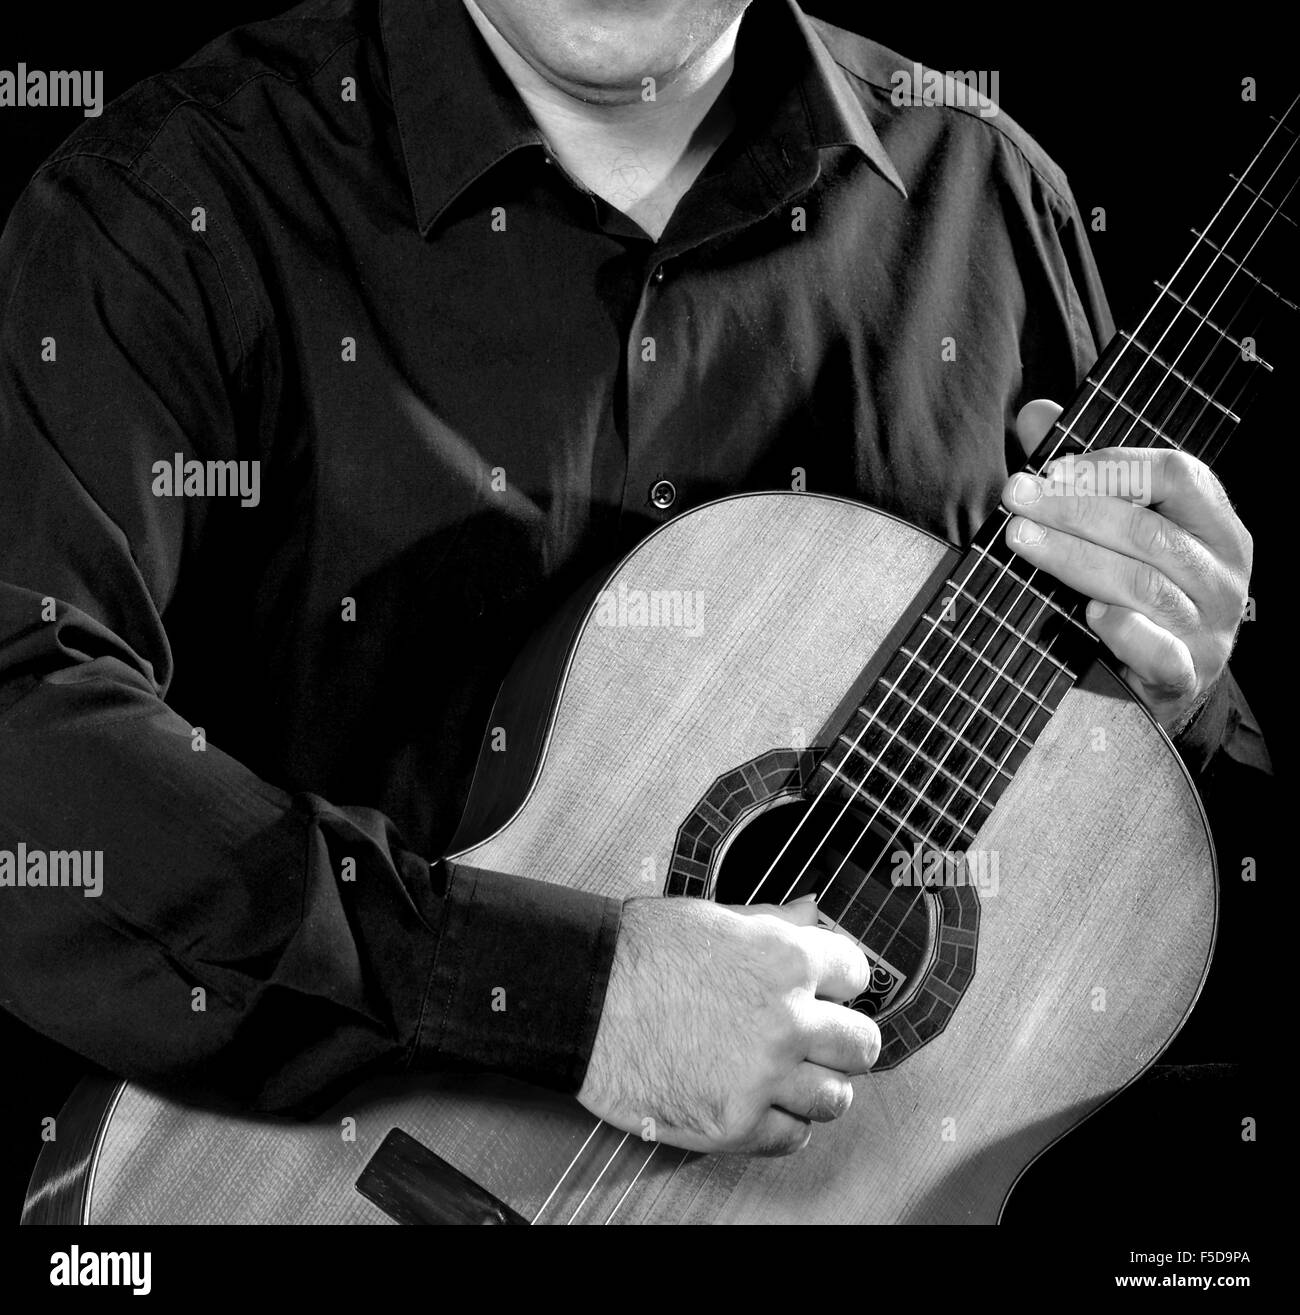 Classical Guitarist low key image square format Unrecognizable person black and white Stock Photo